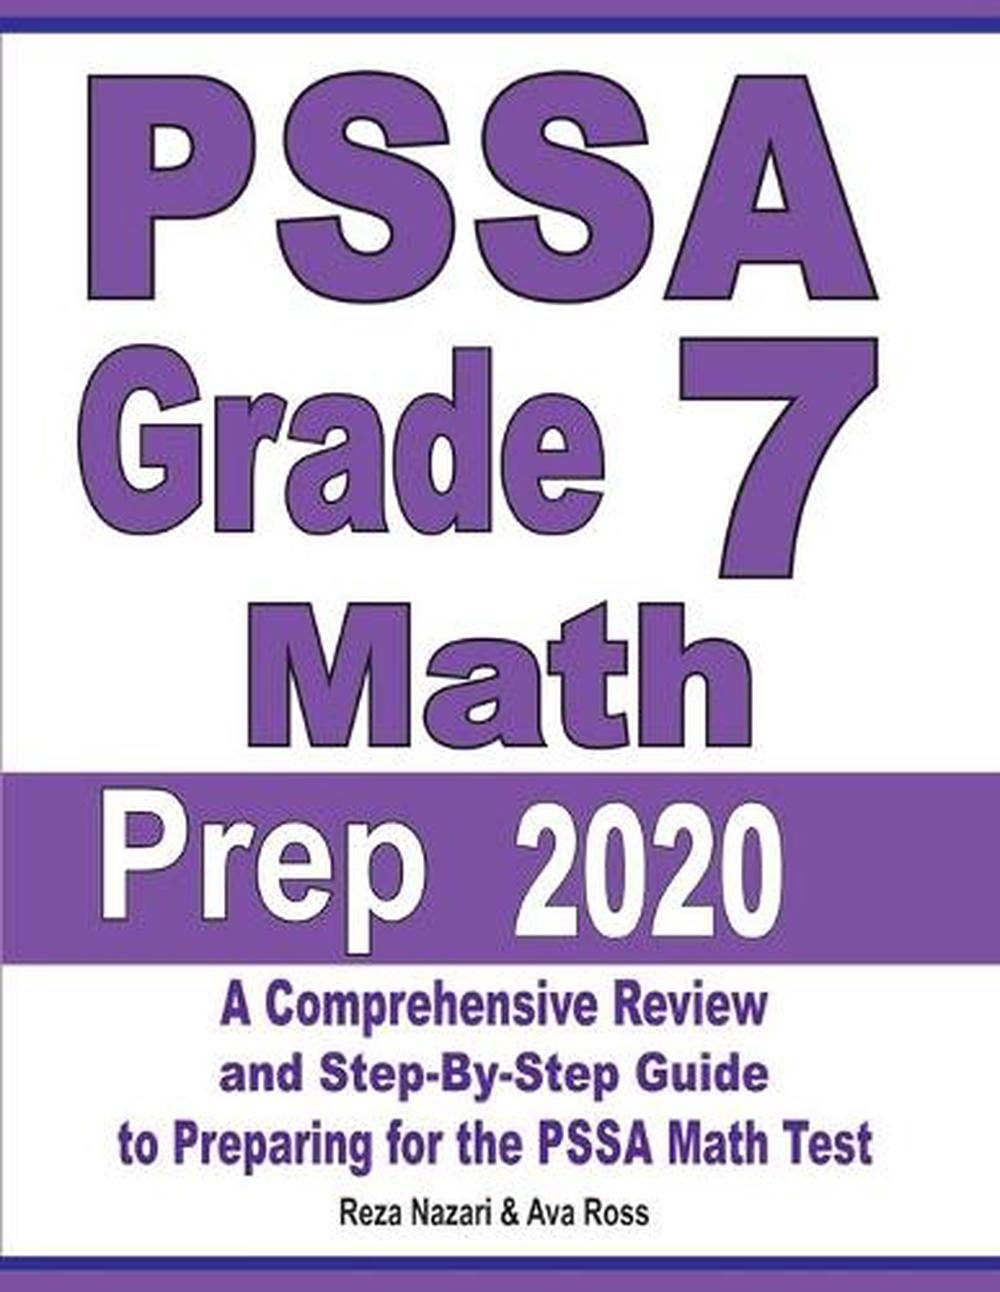 pssa-grade-7-math-prep-2020-a-comprehensive-review-and-step-by-step-guide-to-pr-9781646121656